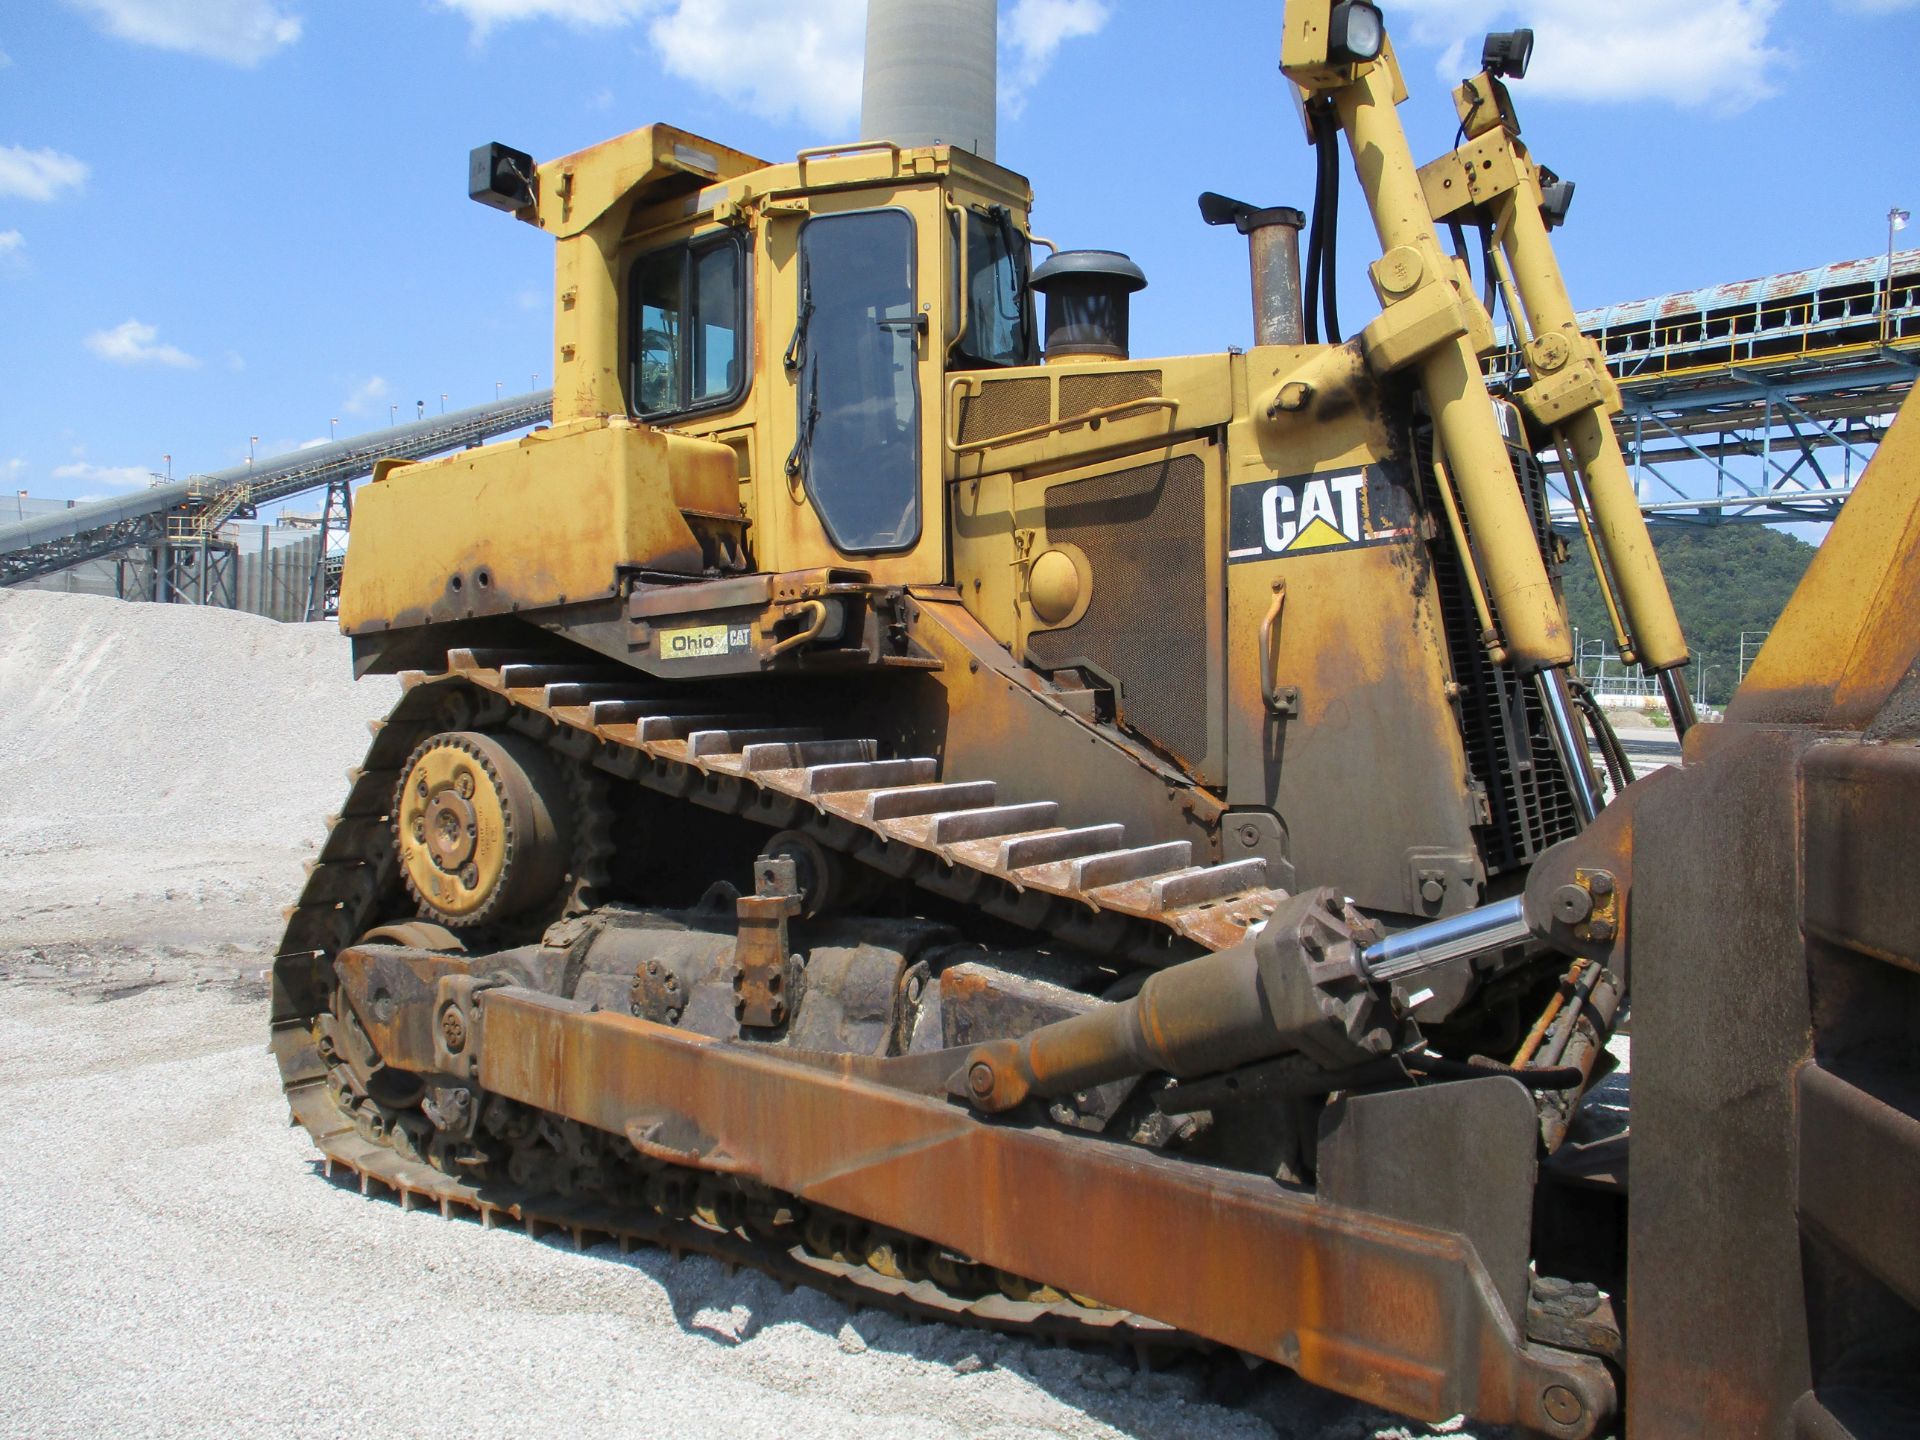 CATERPILLAR MODEL D9R INCLINE TRACK CRAWLER DOZER; S/N D9R-7TL00954, 16,868 HOURS - Image 4 of 11